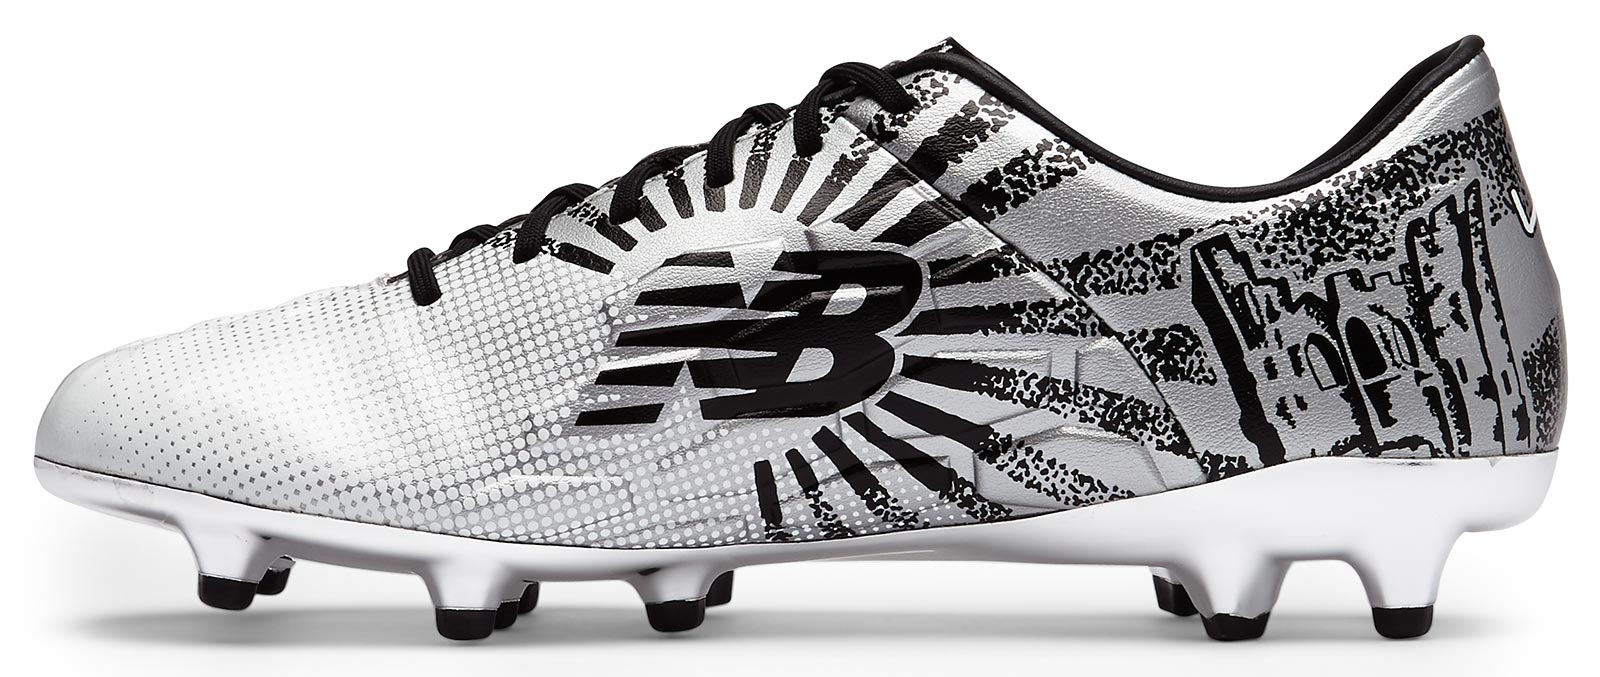 New Balance Visaro Aaron Ramsey Limited-Edition Boots Released